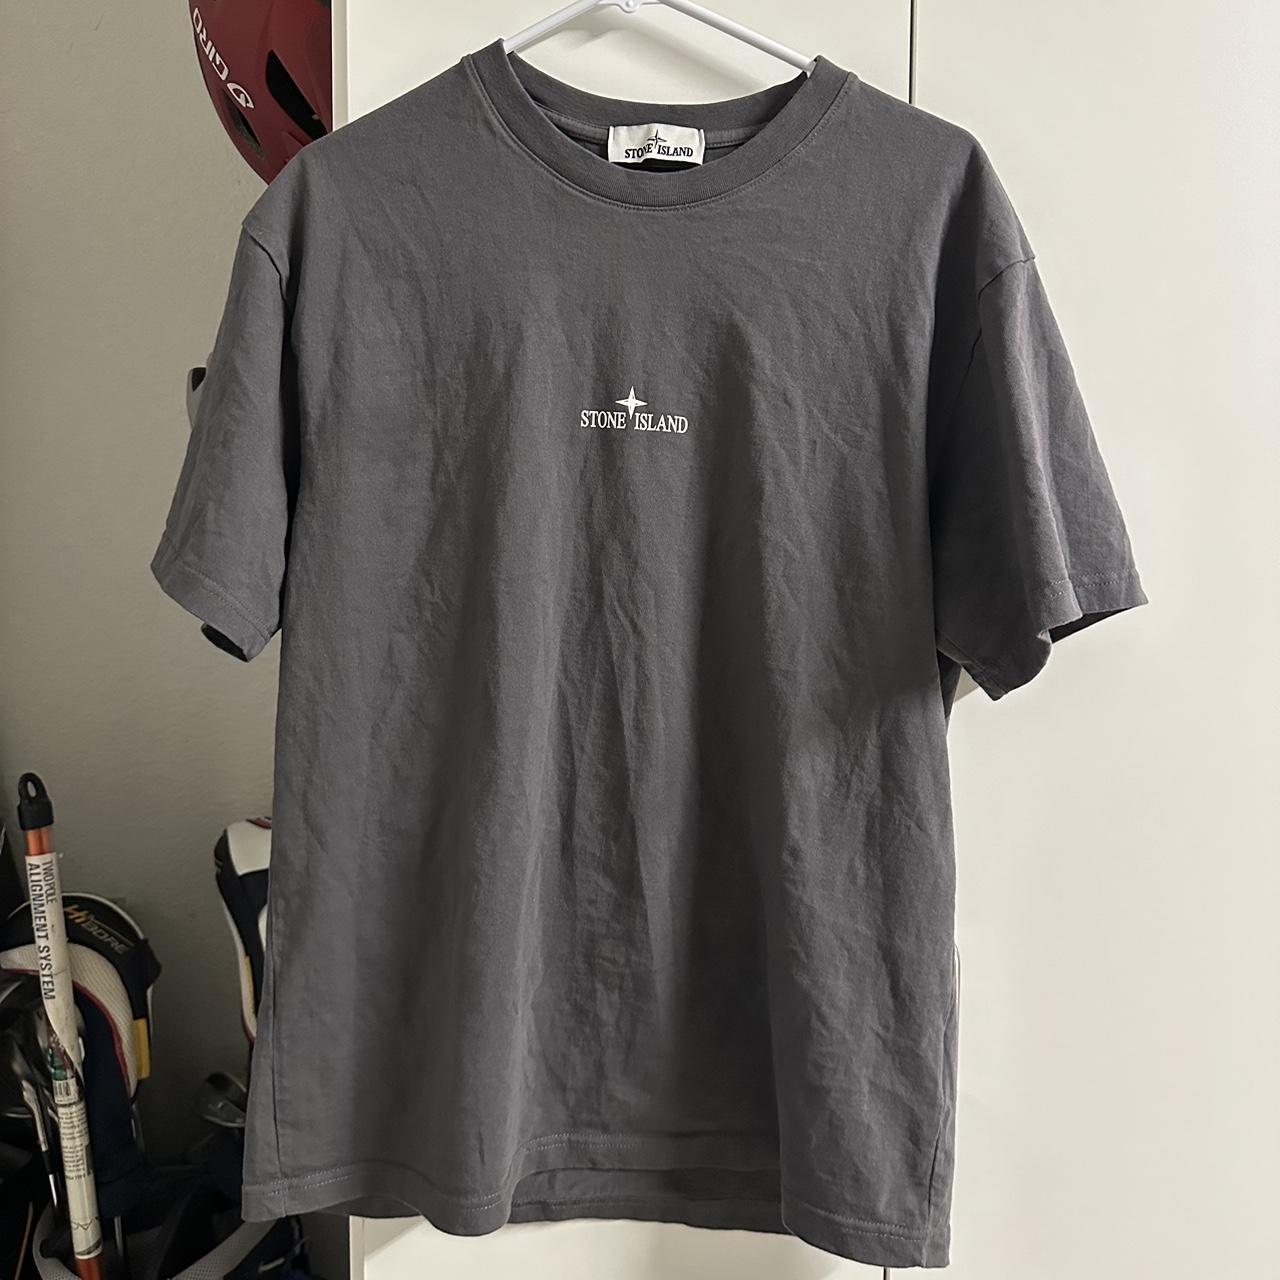 Stone Island Men's Grey and Silver T-shirt (2)